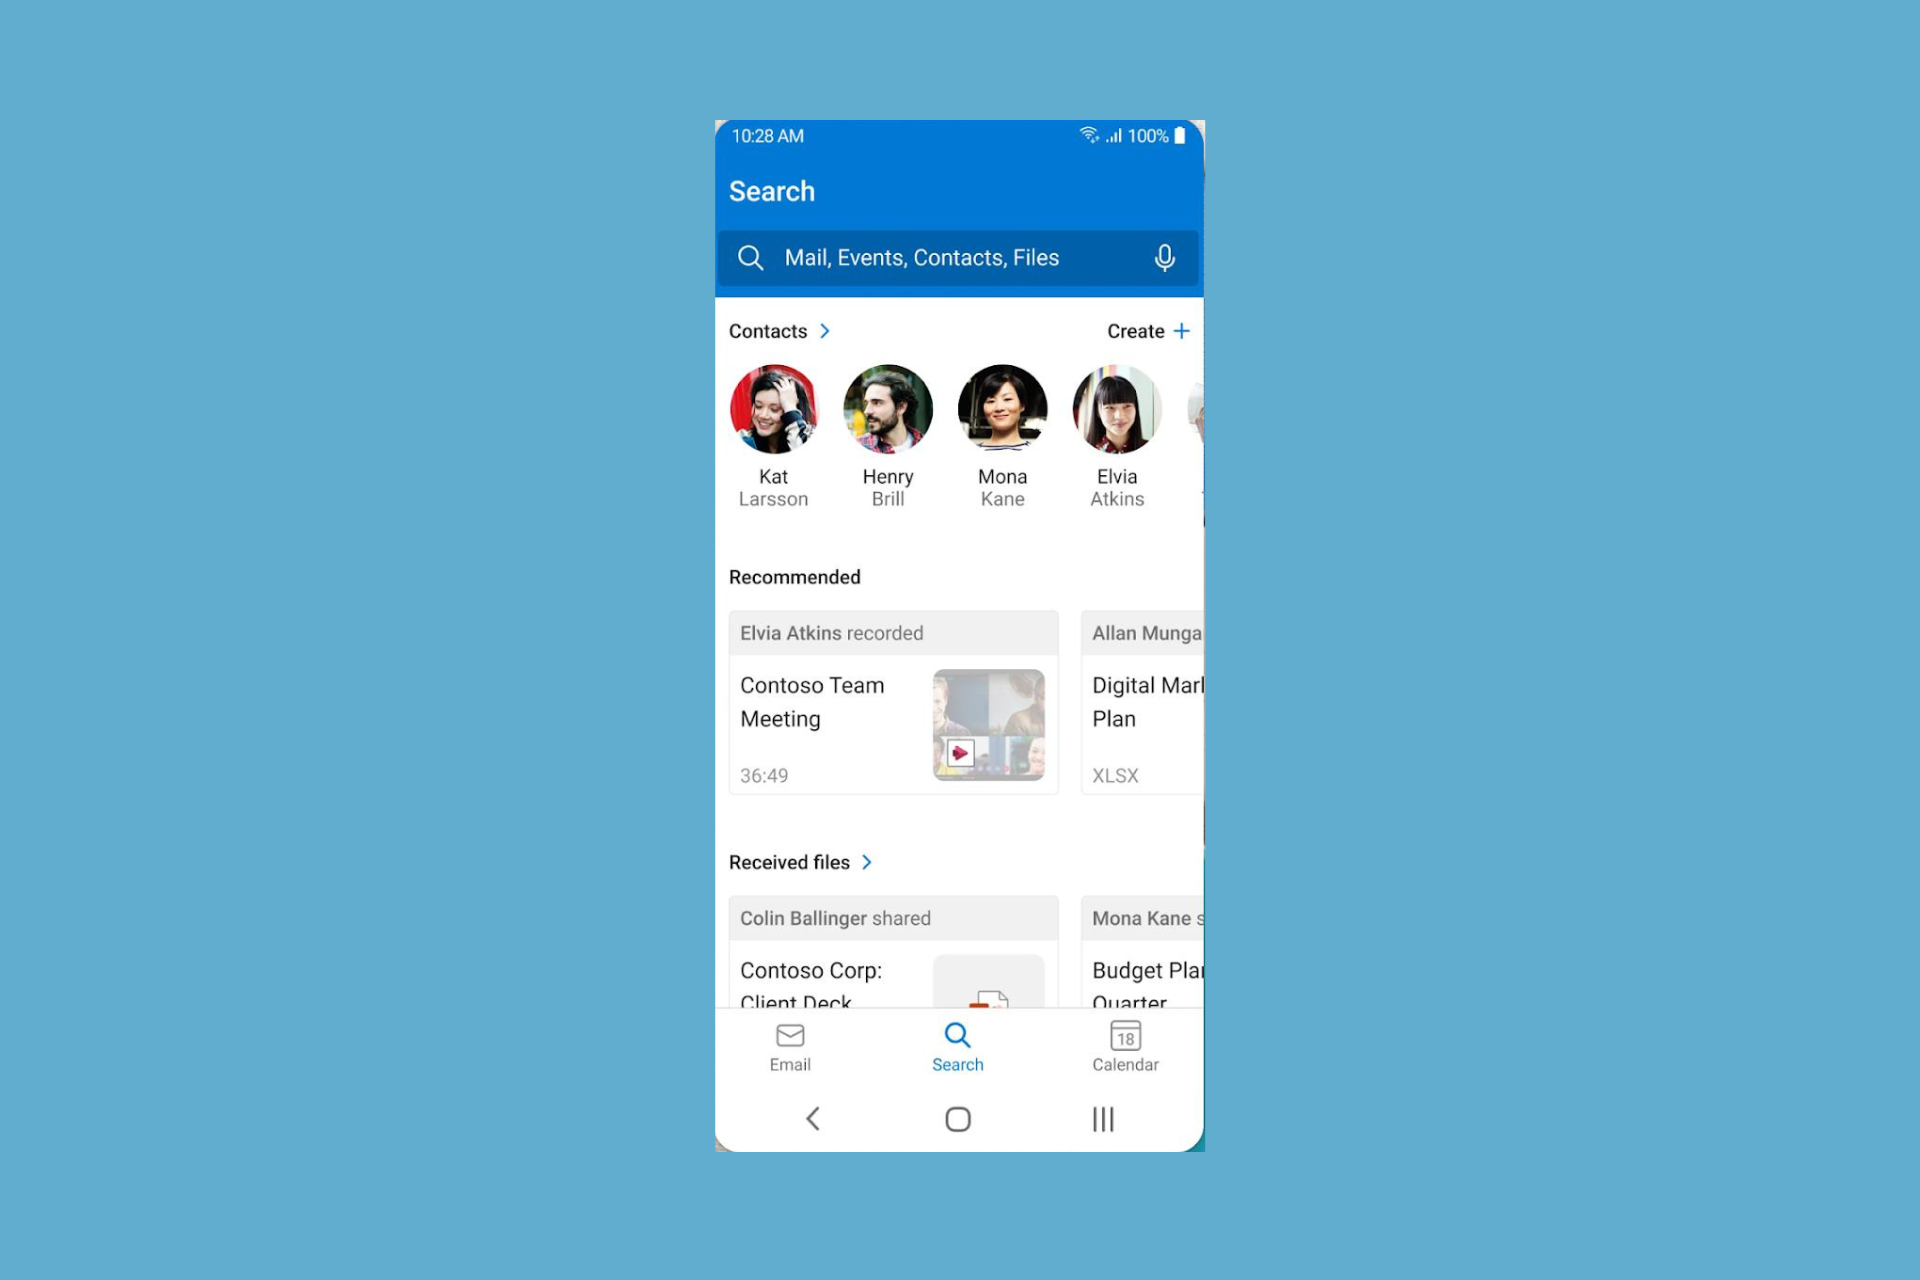 Outlook for Android will soon get search functionality within the Settings menu